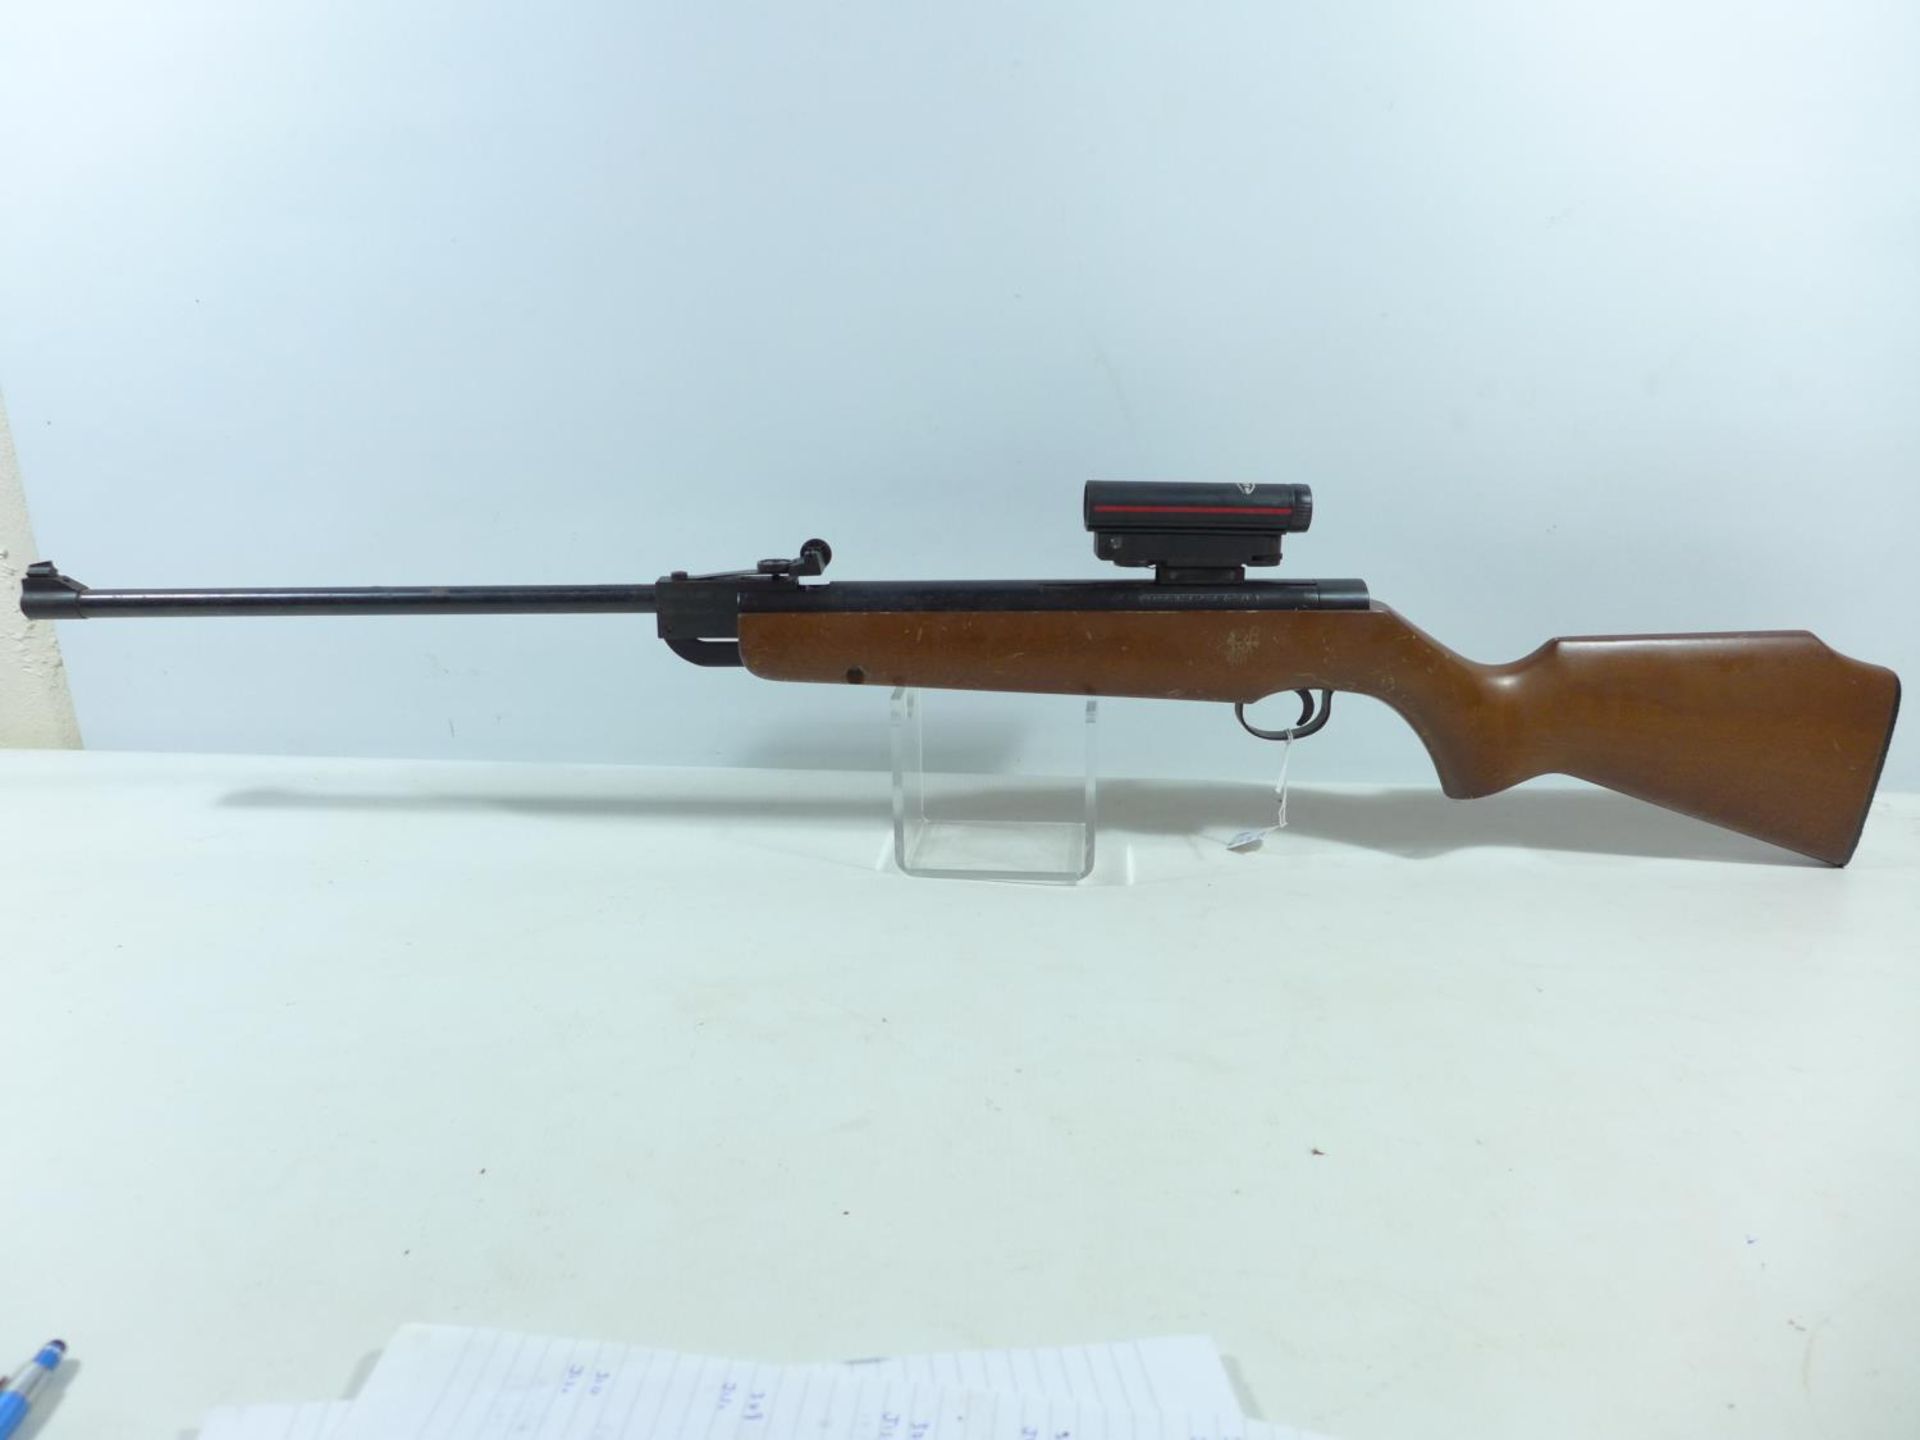 A WEBLEY AND SCOTT EXCEL .22 CALIBRE AIR RIFLE, 44CM BARREL, SERIAL NUMBER 831825, FITTED WITH - Image 3 of 7